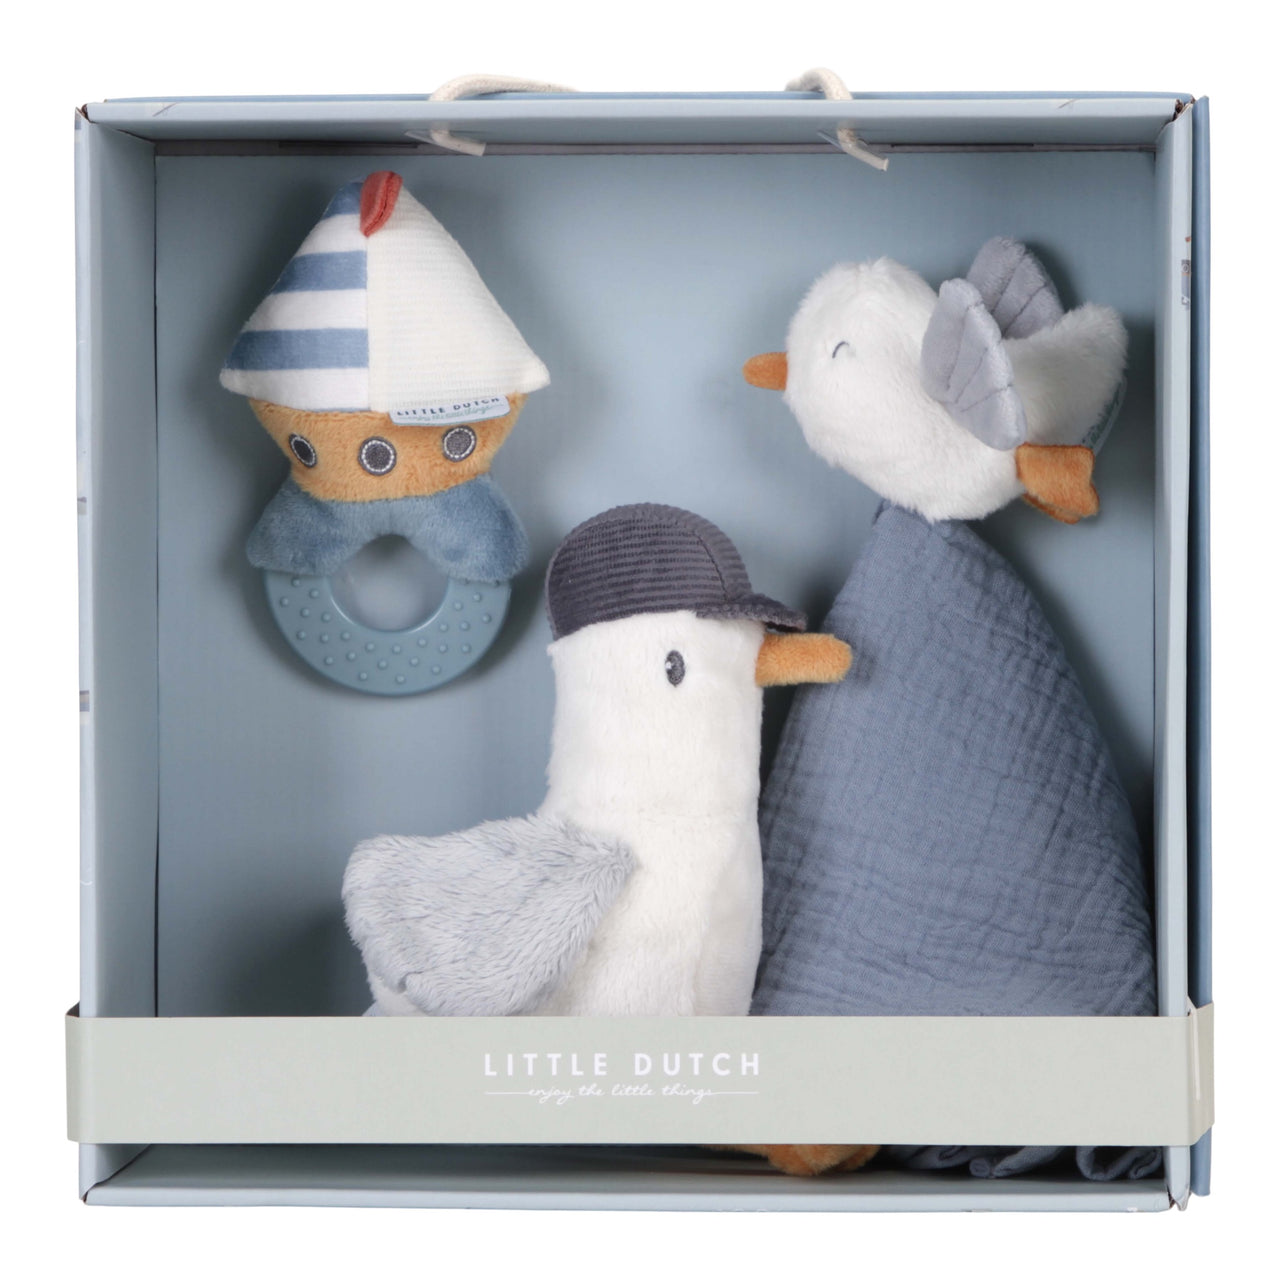 Our favourites of the Sailors Bay collection make the perfect gift for a newborn or baby shower. This lovely box includes three soft items to snuggle, hug and play with. The cuddle cloth with a soft seagull is wonderful to snuggle with, but is also fun to use for a play of peek-a-boo. 